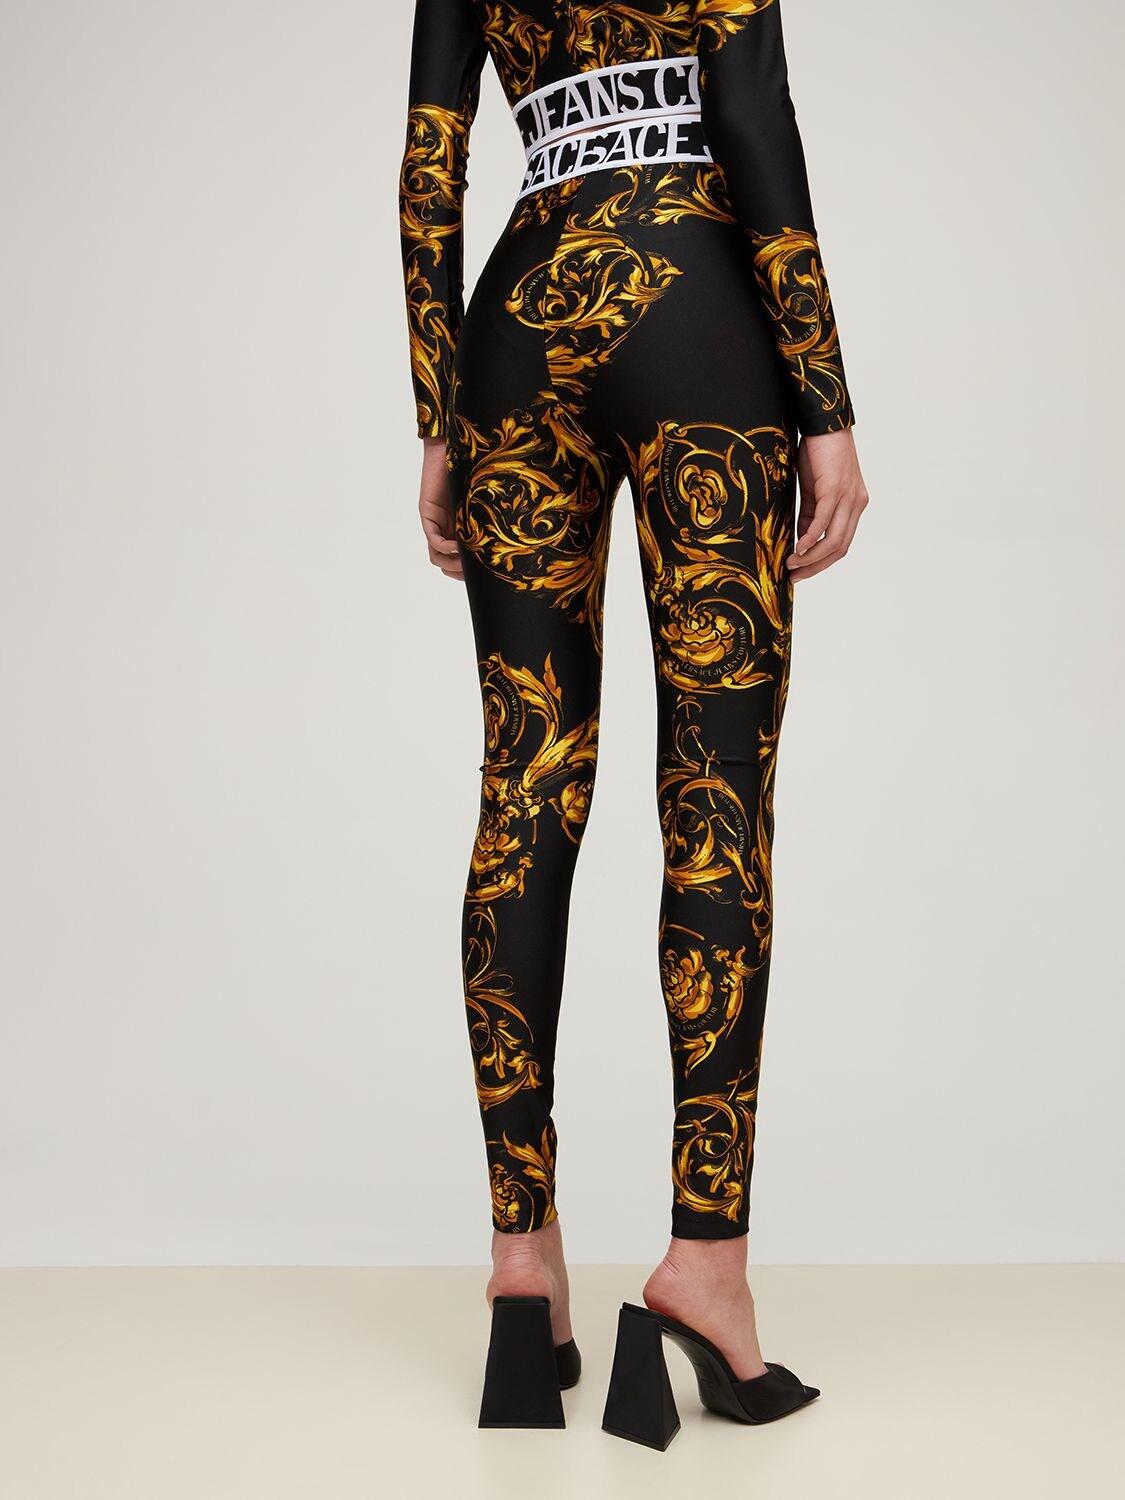 Versace Jeans Couture Garland Print Lycra Leggings | Lyst